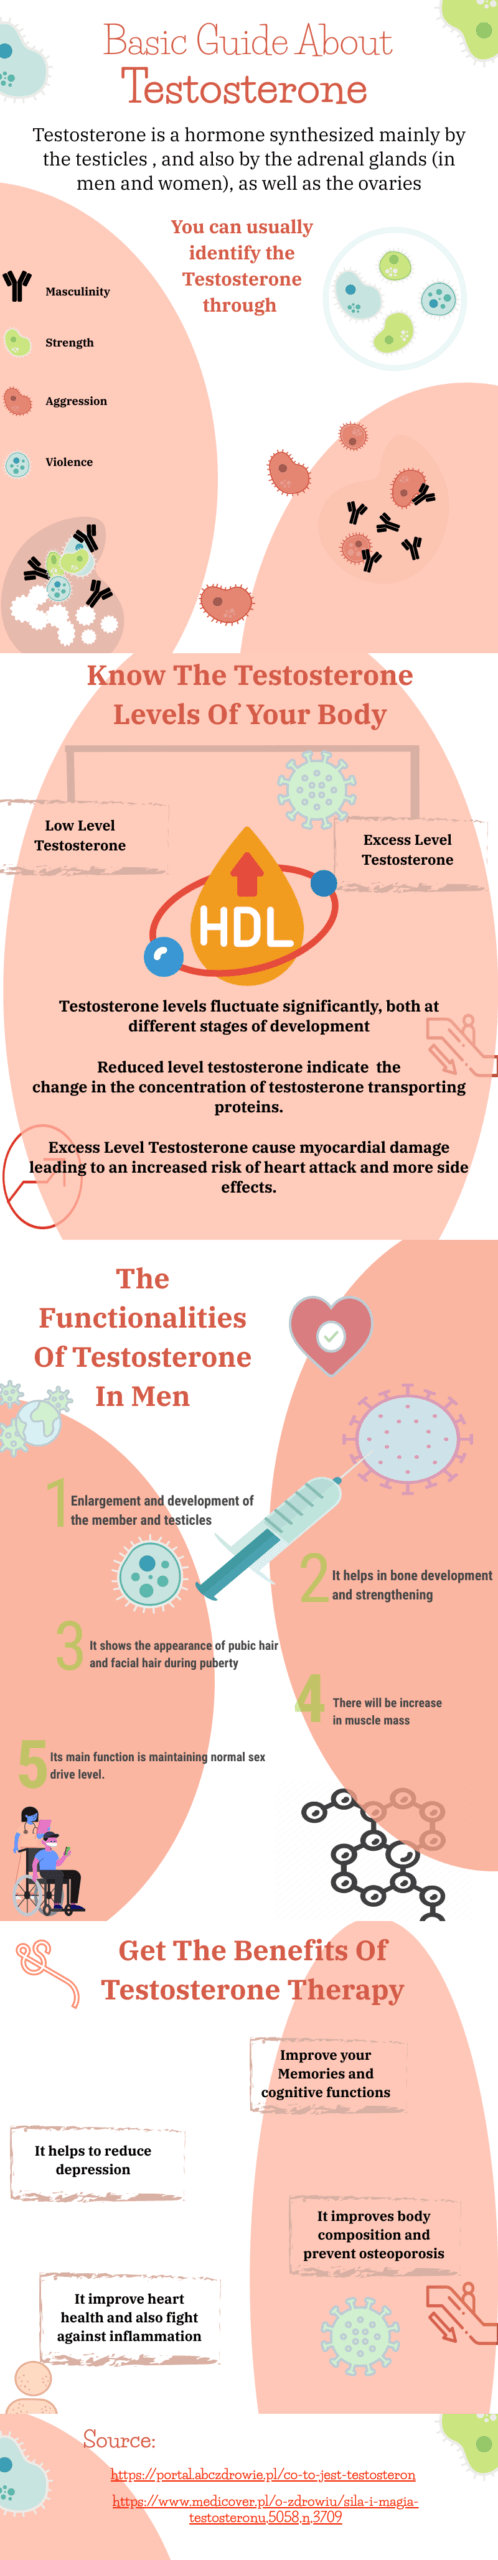 testosterone guide for hormonal disorders